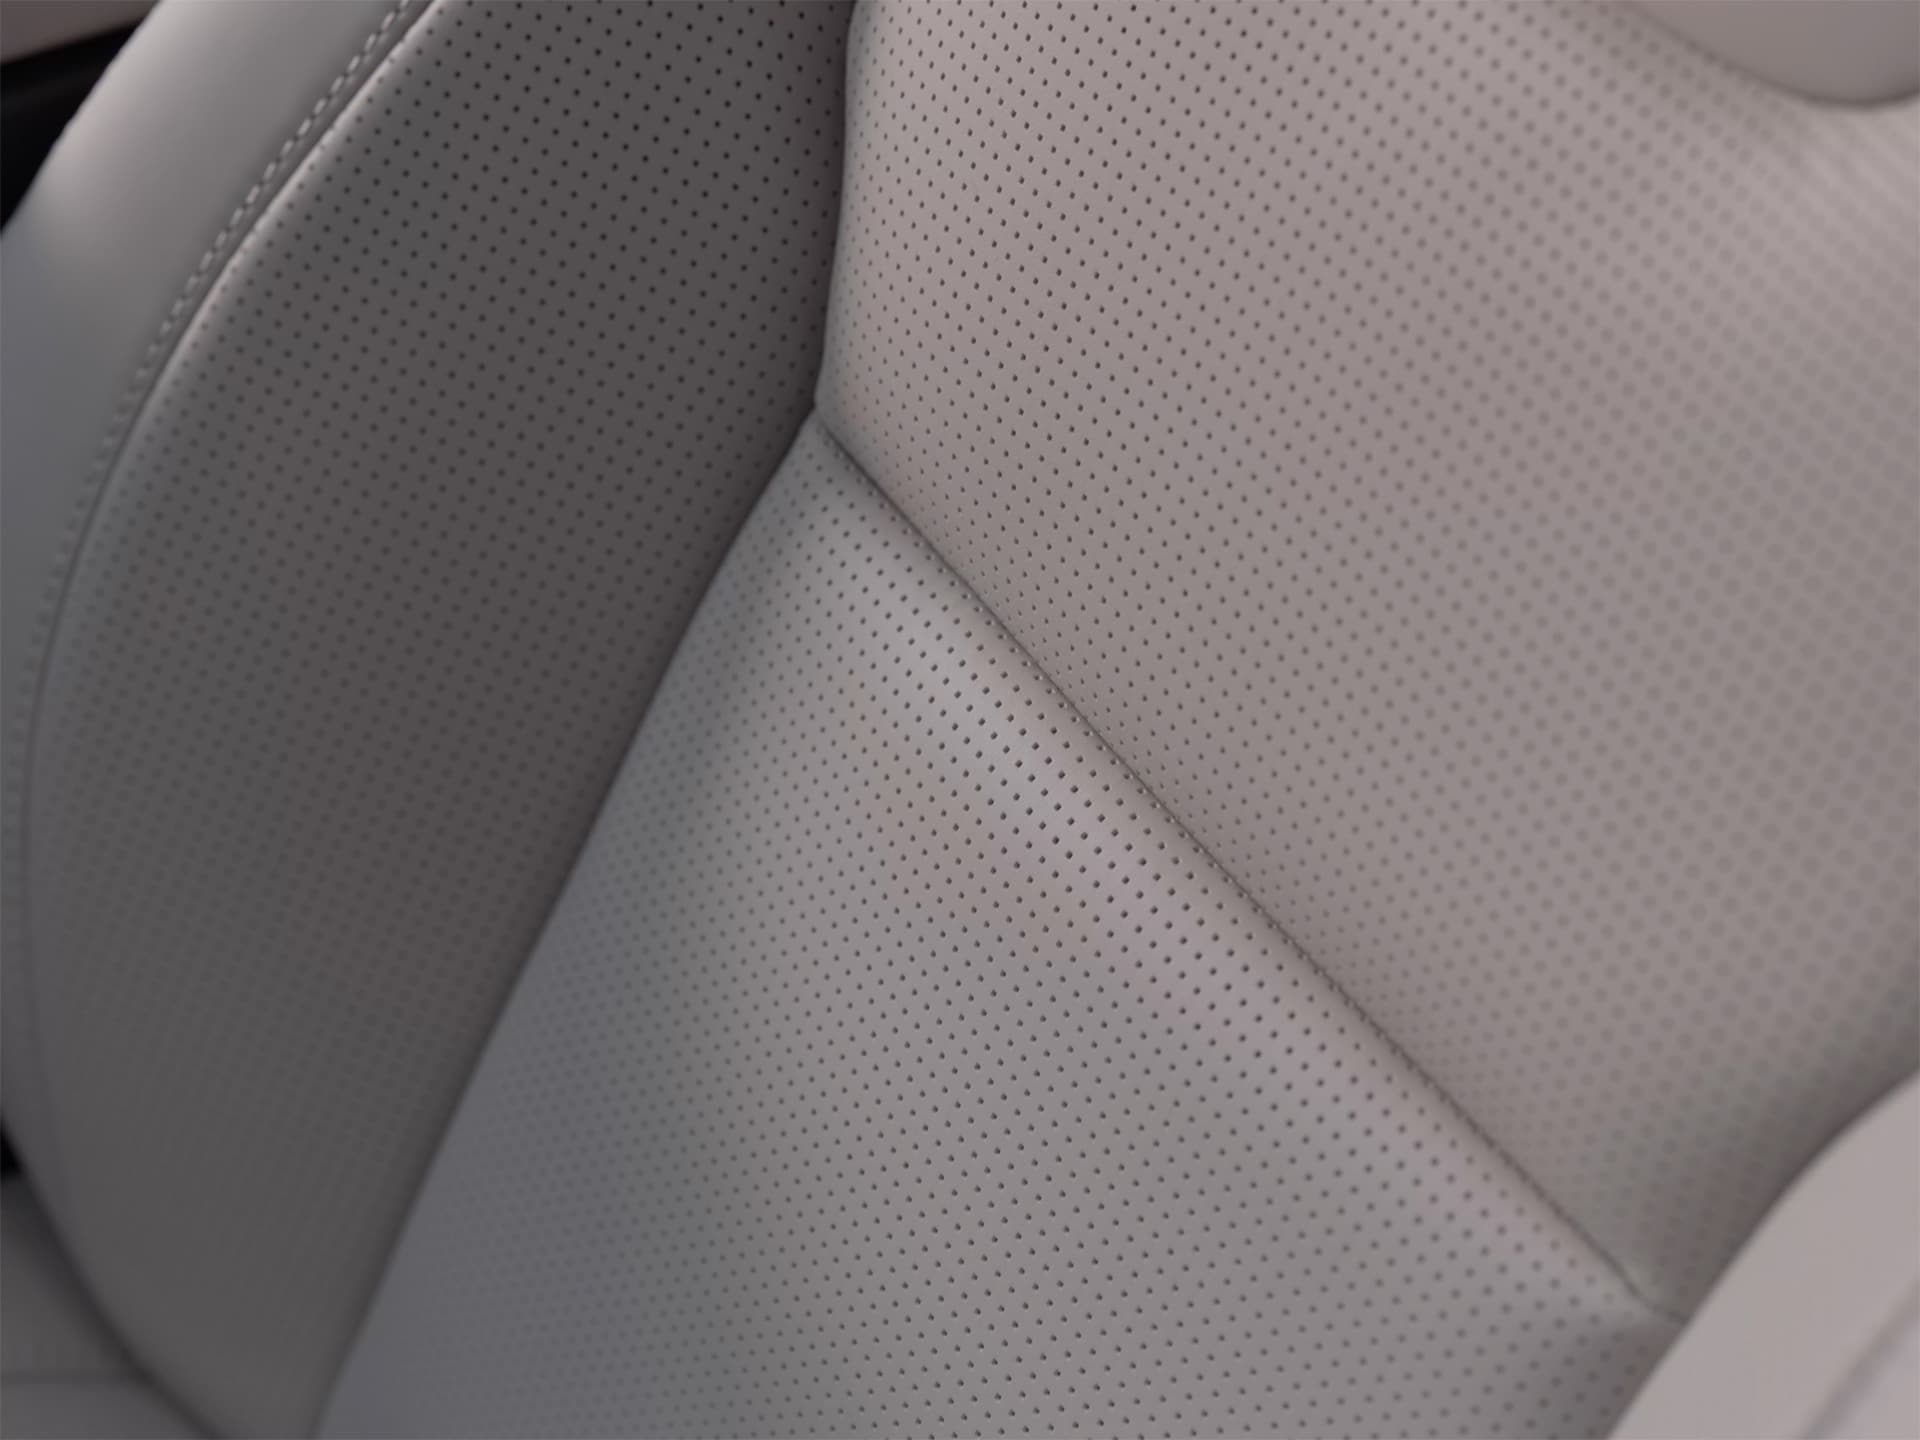 Nappa leather front seats in a Volvo XC90 SUV.